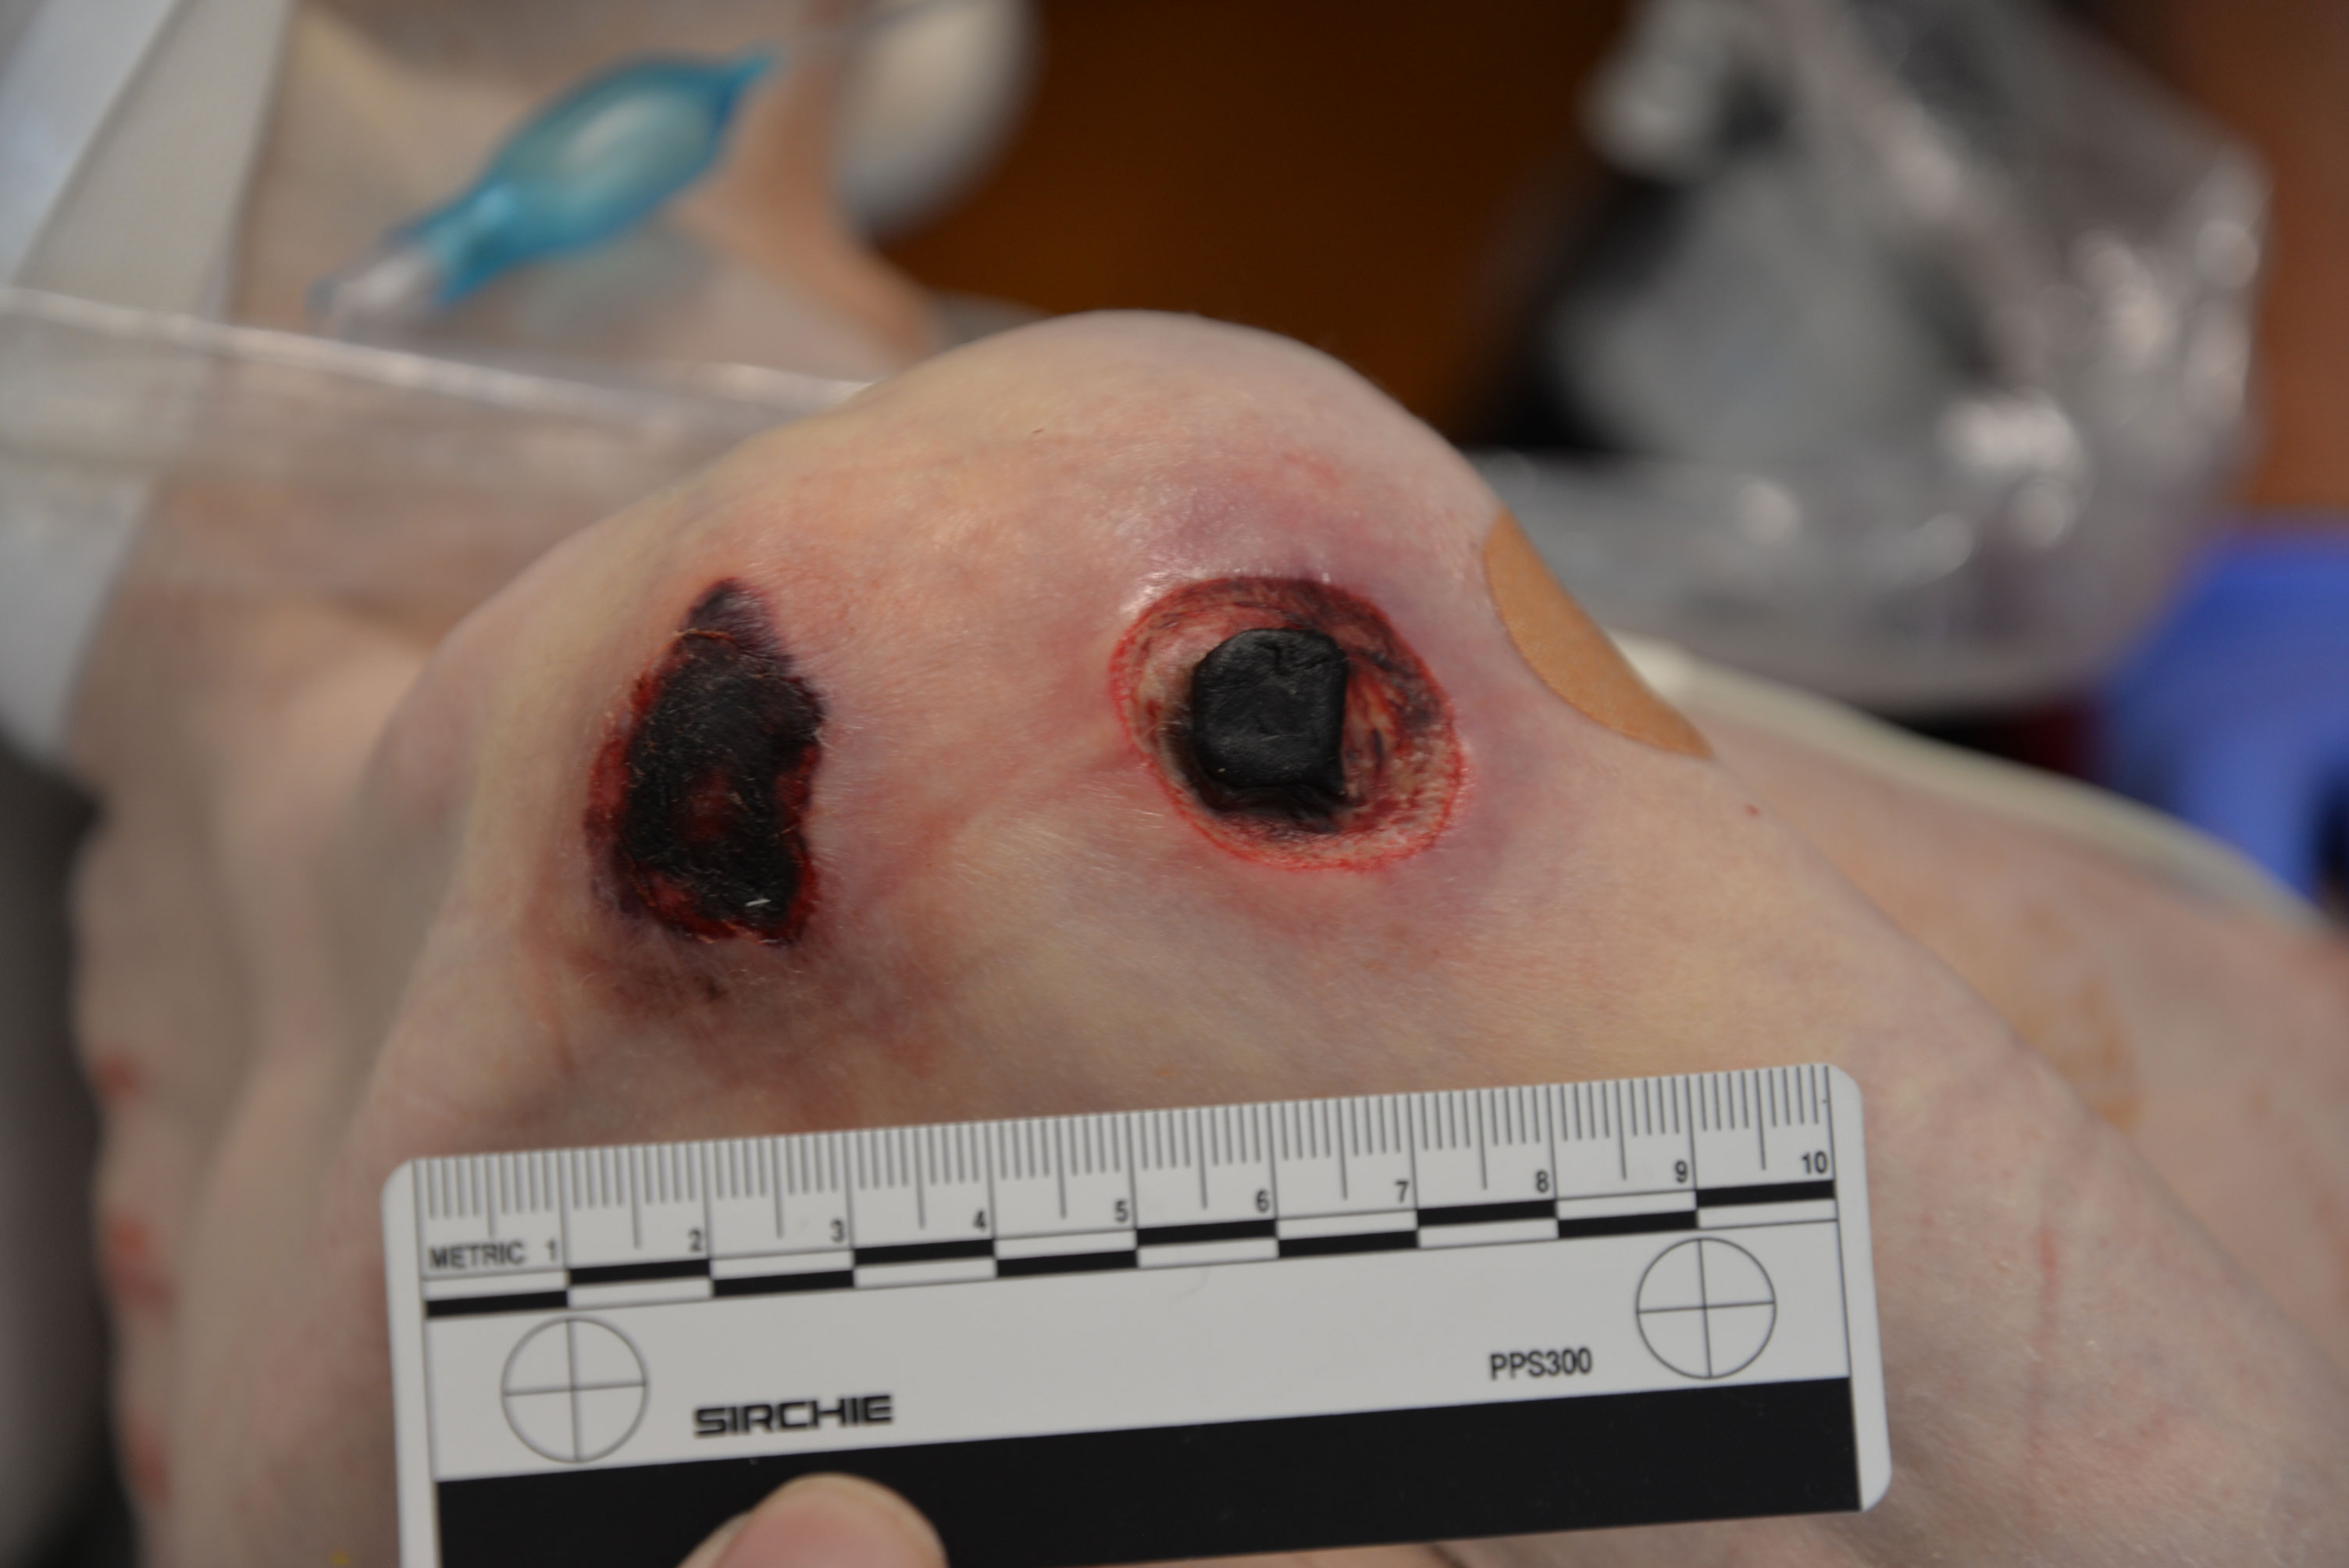 A close-up photo of Aaron’s right shoulder reveals two severe pressure sores. Someone is holding a black and white ruler to measure the diameter of the wounds. The smaller sore, on the outside of Aaron’s shoulder, measures approximately 2 cm in diameter and the interior scab is approximately .75 cm deep. The bone under this wound may be infected; layers of tissue are missing and the scab is recessed from the wound’s edges. The other pressure sore, on the back of Aaron’s shoulder, is wider. The skin around both wounds is light purple. Aaron wears a band aid on the front of his shoulder. 